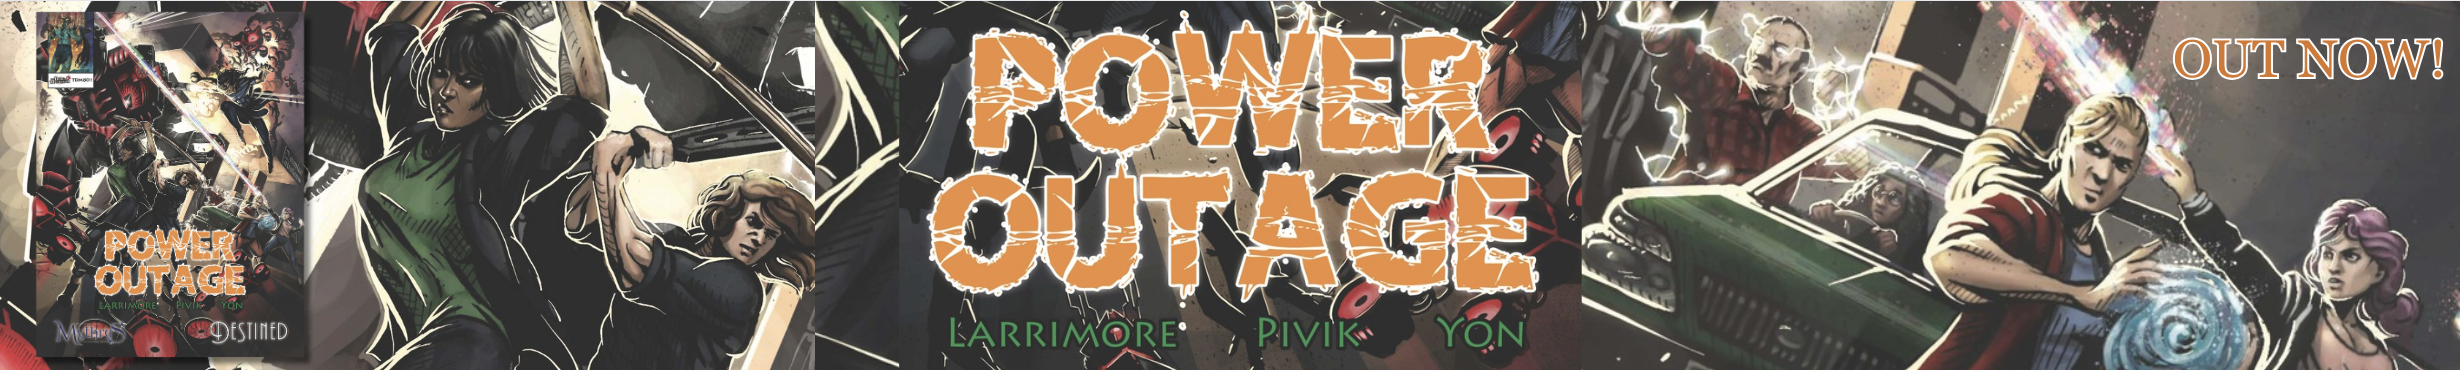 Power Outage